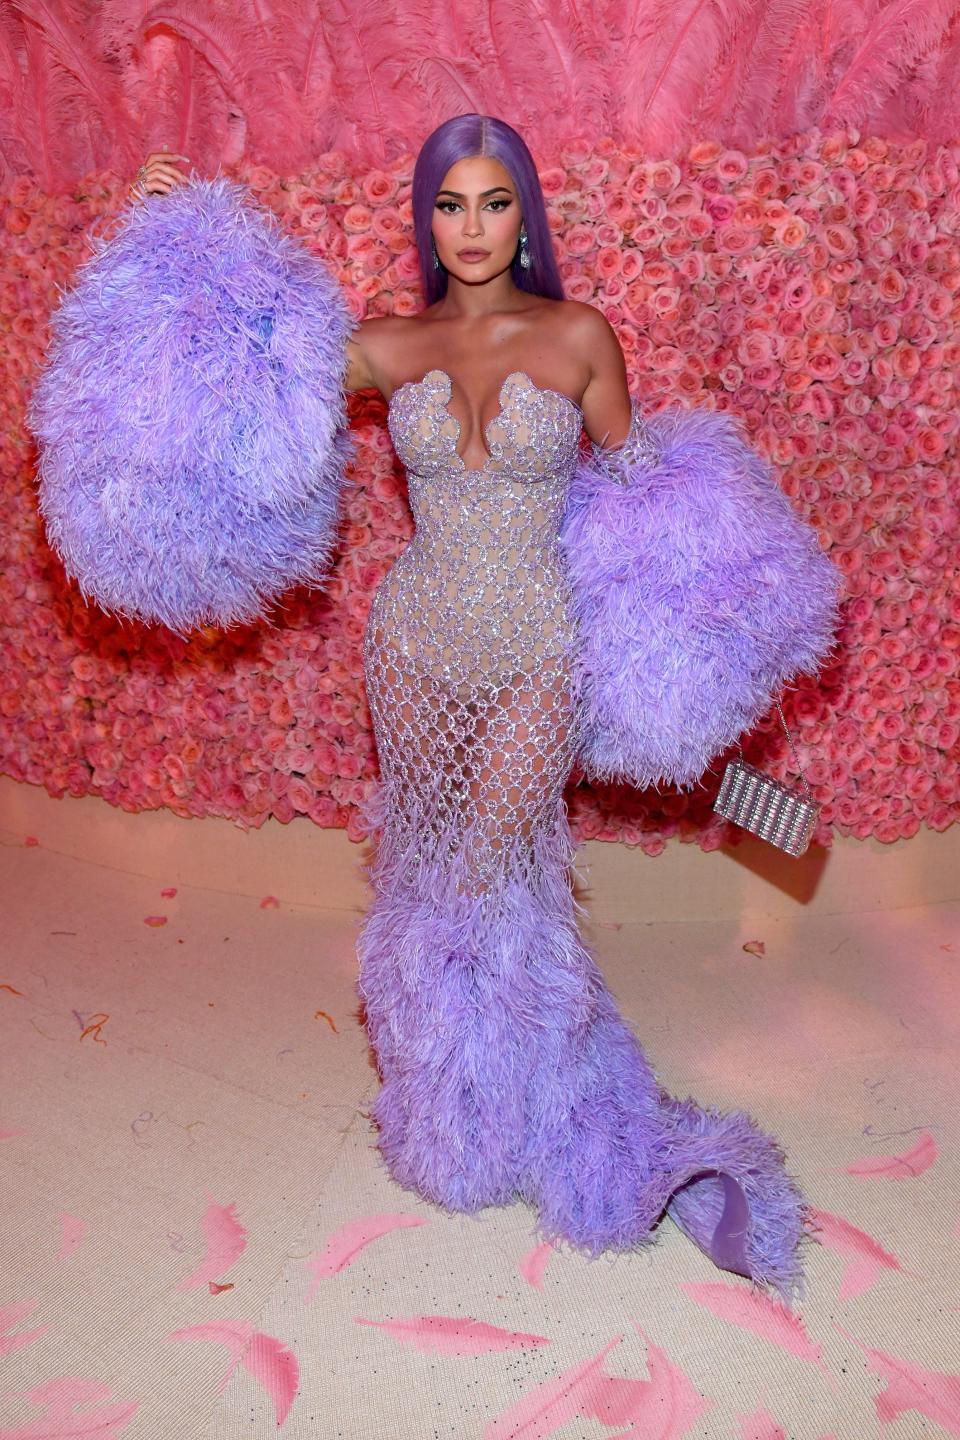 Kylie Jenner poses in front of a wall of pink roses wearing a shimmering dress with a purple feathered skirt, giant purple pom poms, and purple hair.